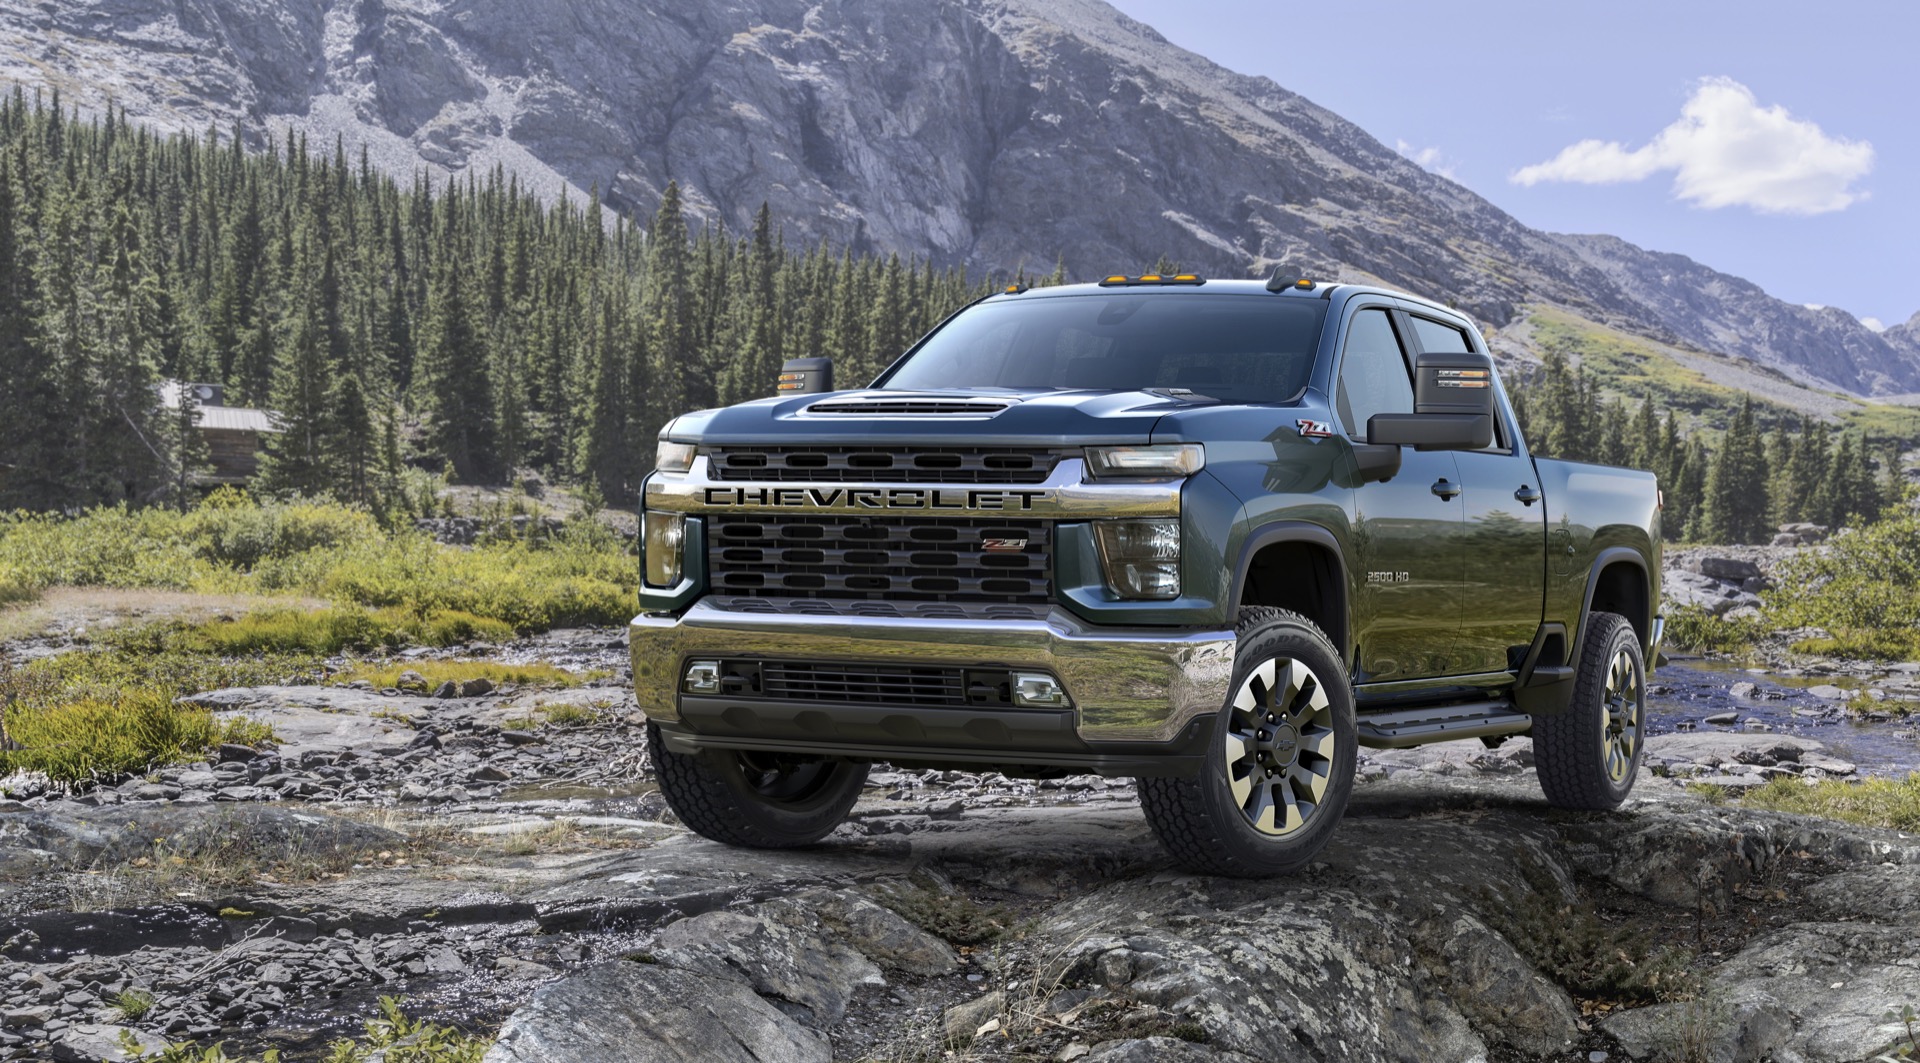 2021 Chevy Silverado 1500 Pick-up Truck Review